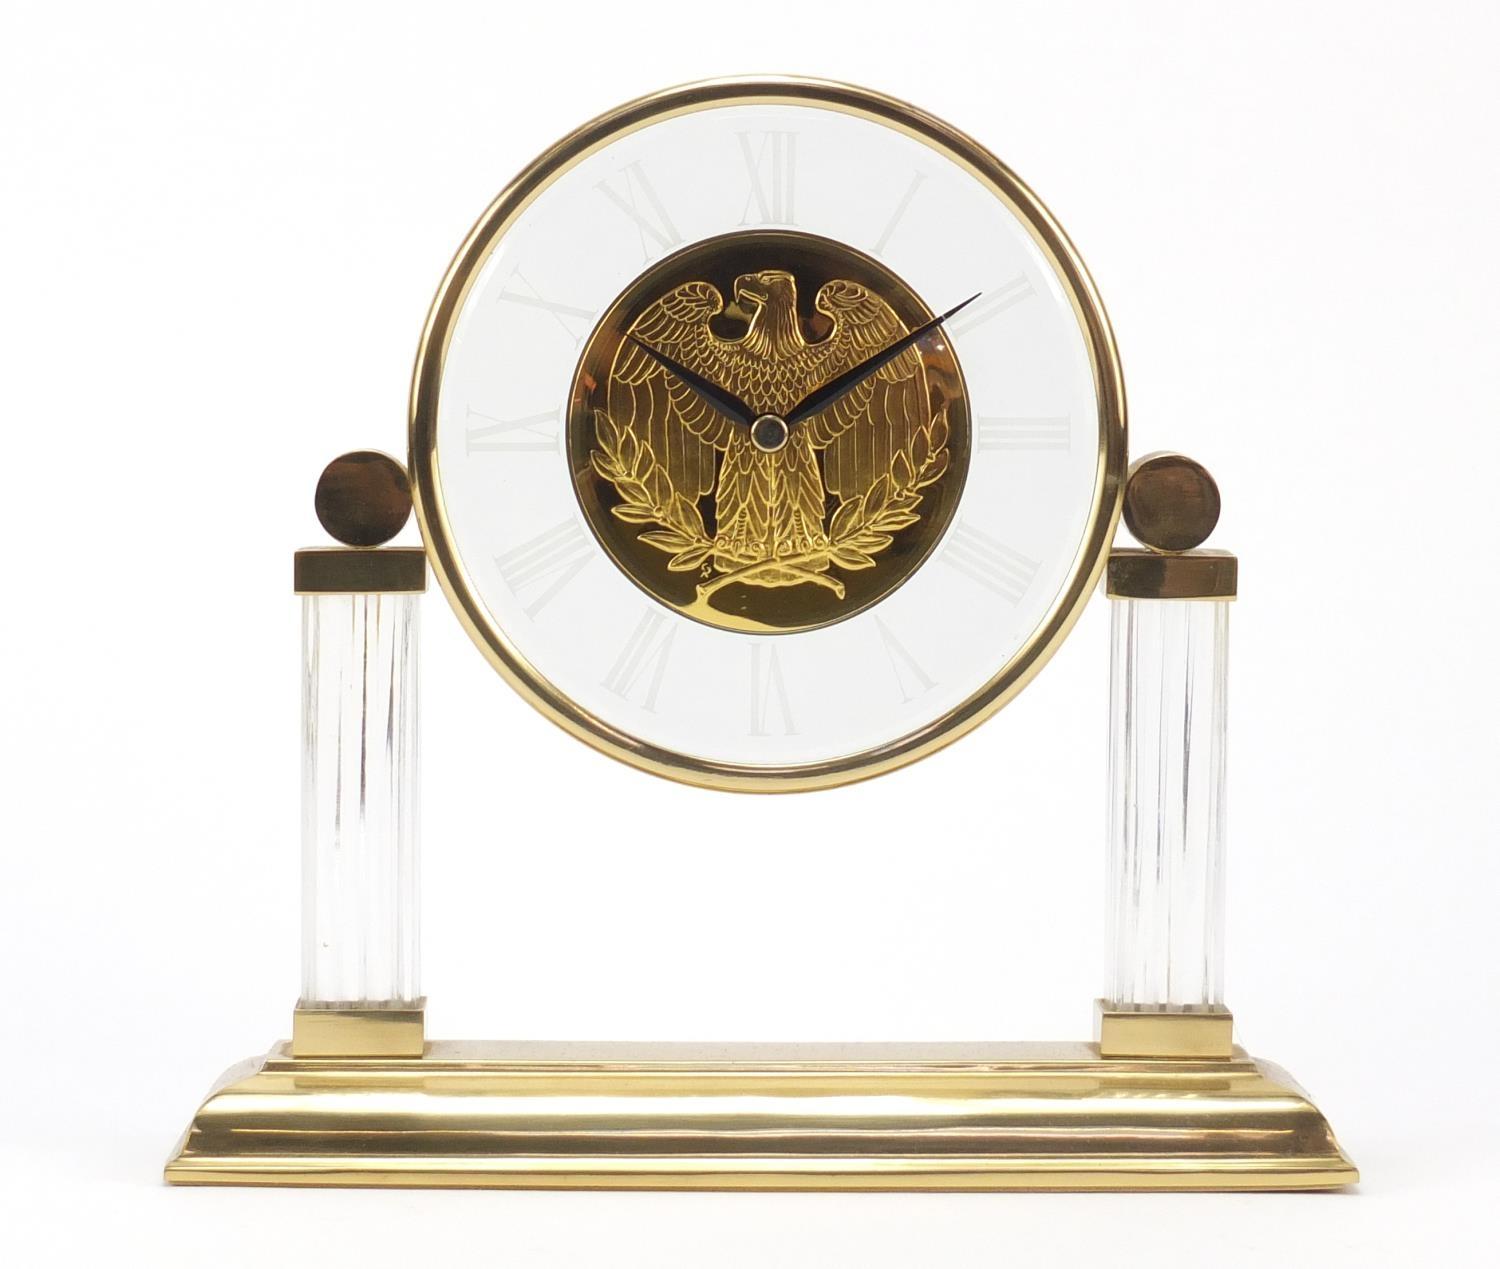 Franklin Mint golden eagle commemorative clock by Gilroy Roberts, 21cm high : For Further - Image 2 of 12